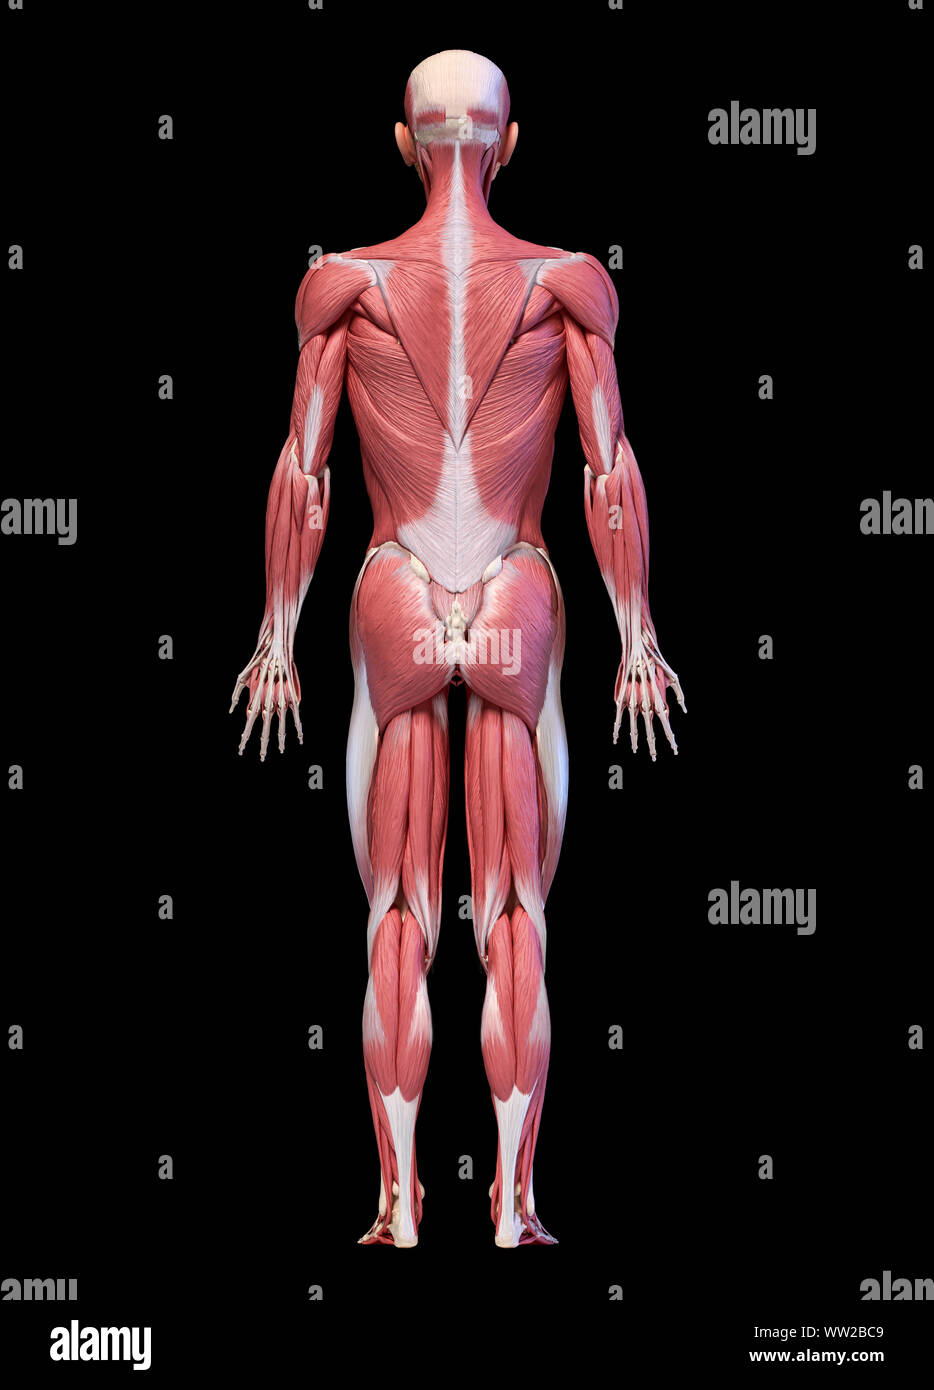 Human anatomy 3d illustration, male muscular system full body, back view on black background. Stock Photo